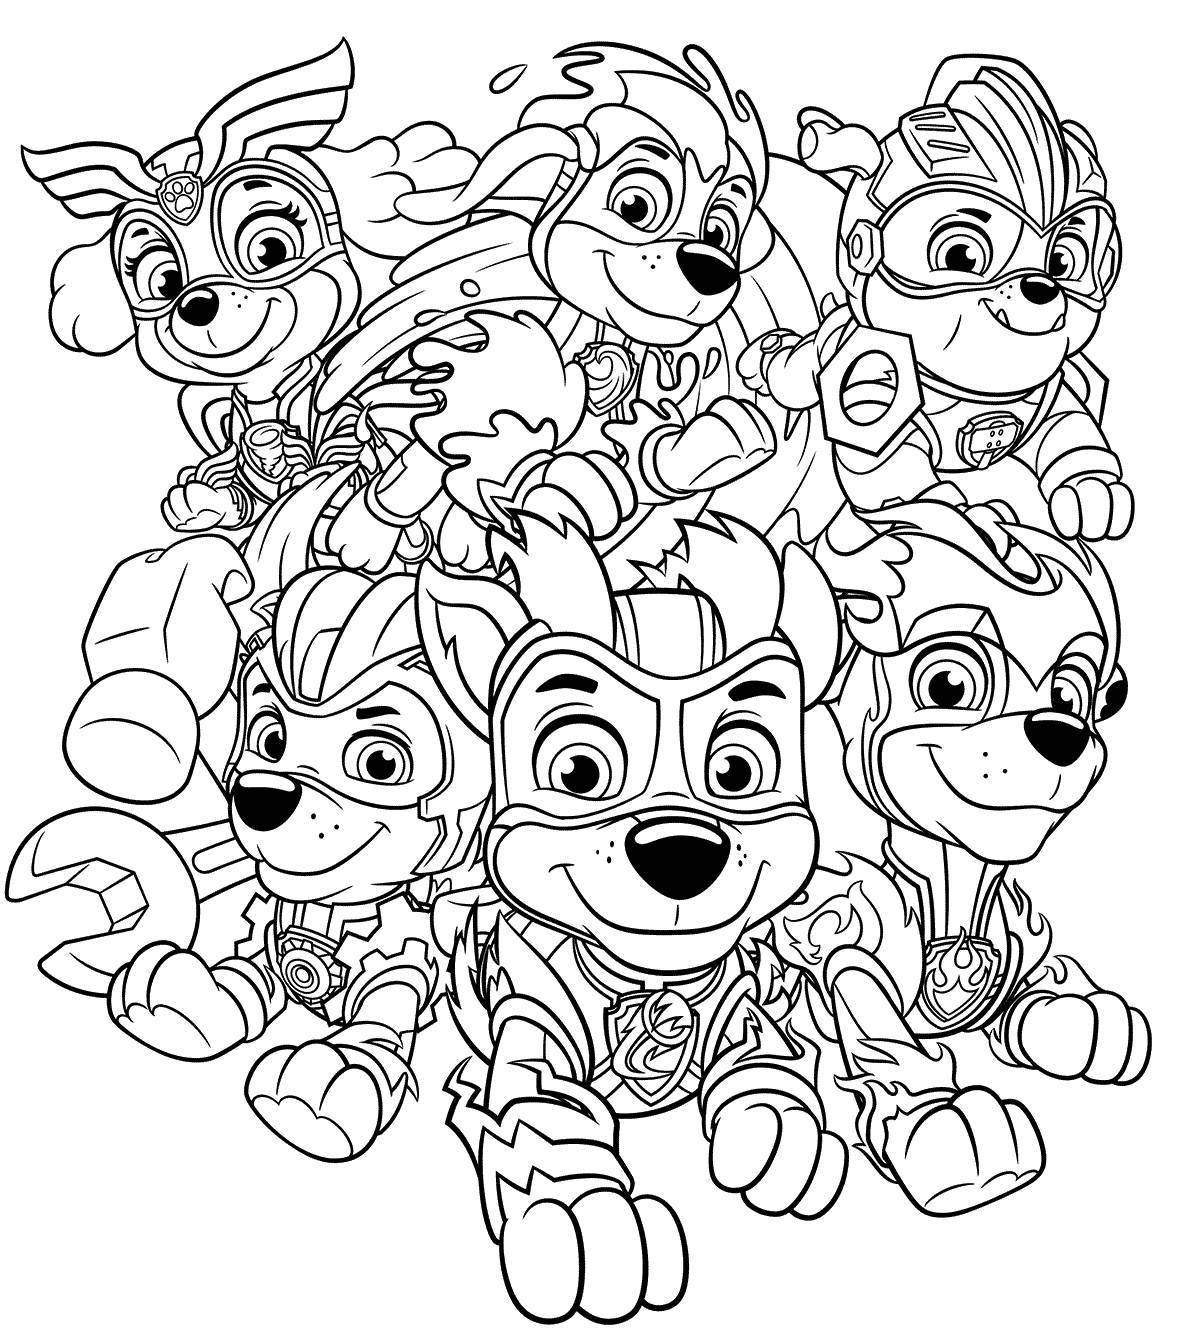 Paw Patrol holiday coloring page